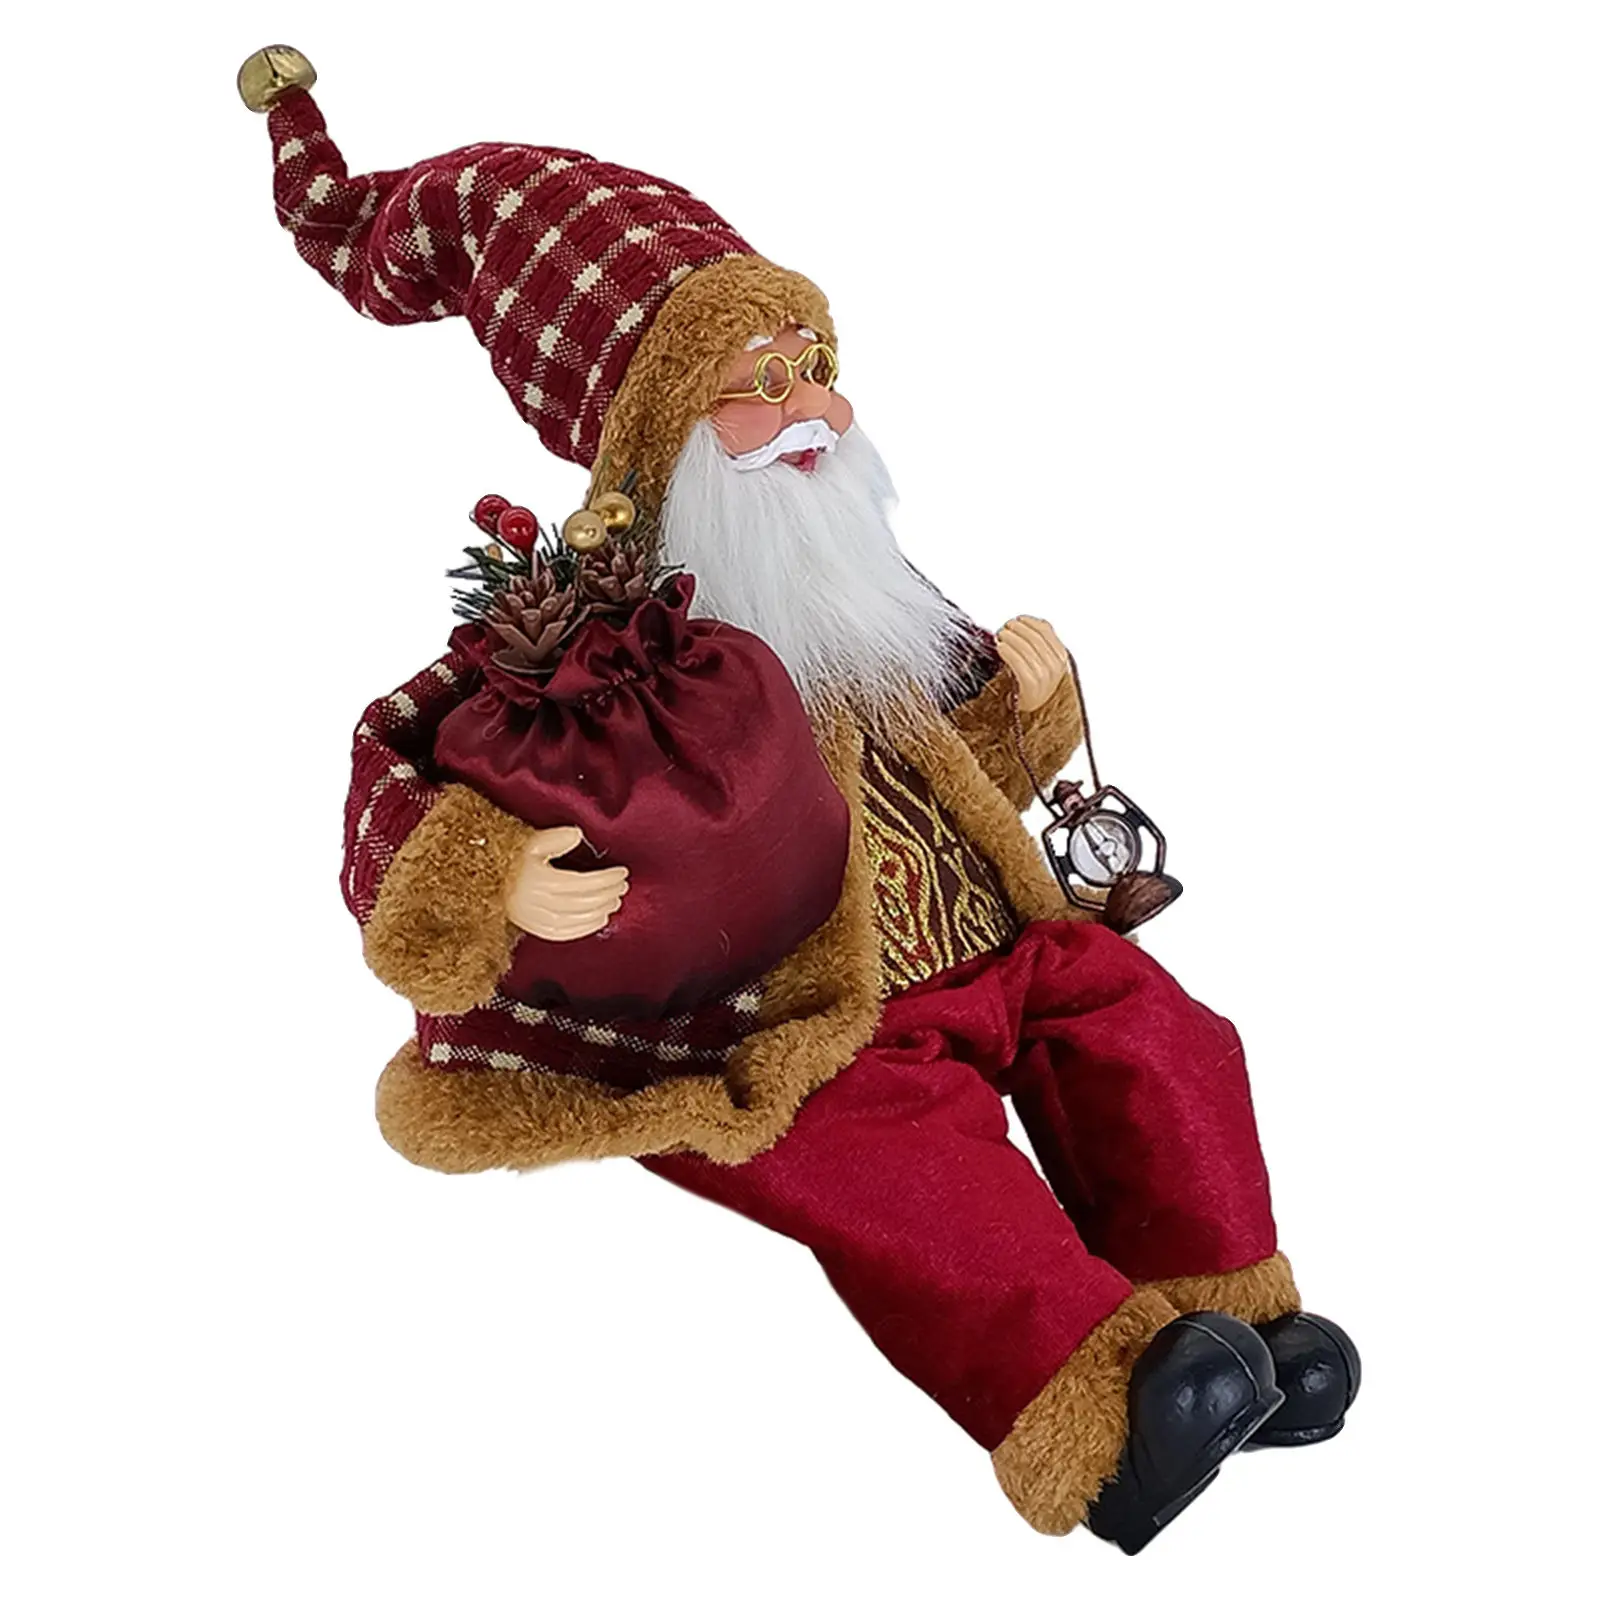 Santa Claus Doll Snowman New Year Dwarf Traditional Sitting Moving Cute Decorations Figurines for Office Party Xmas Tree Kids